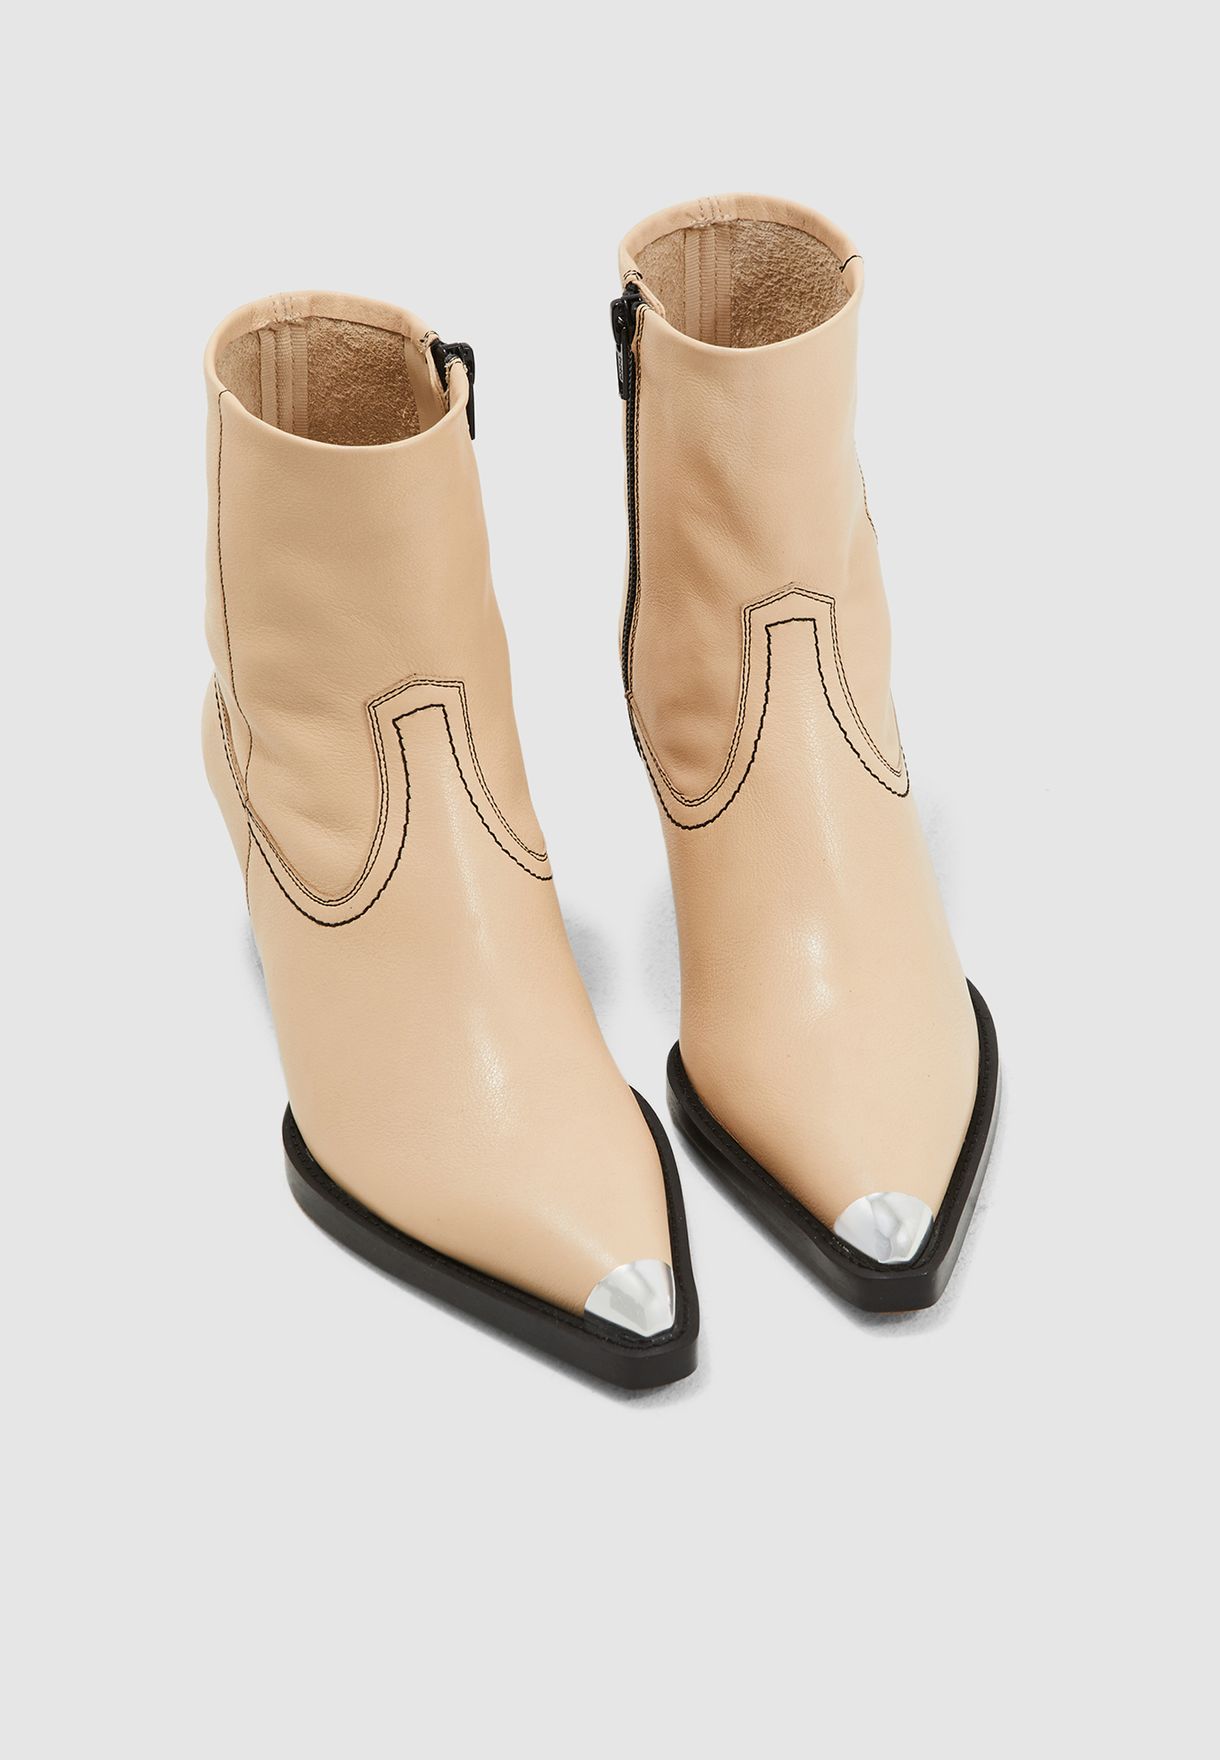 topshop nude boots